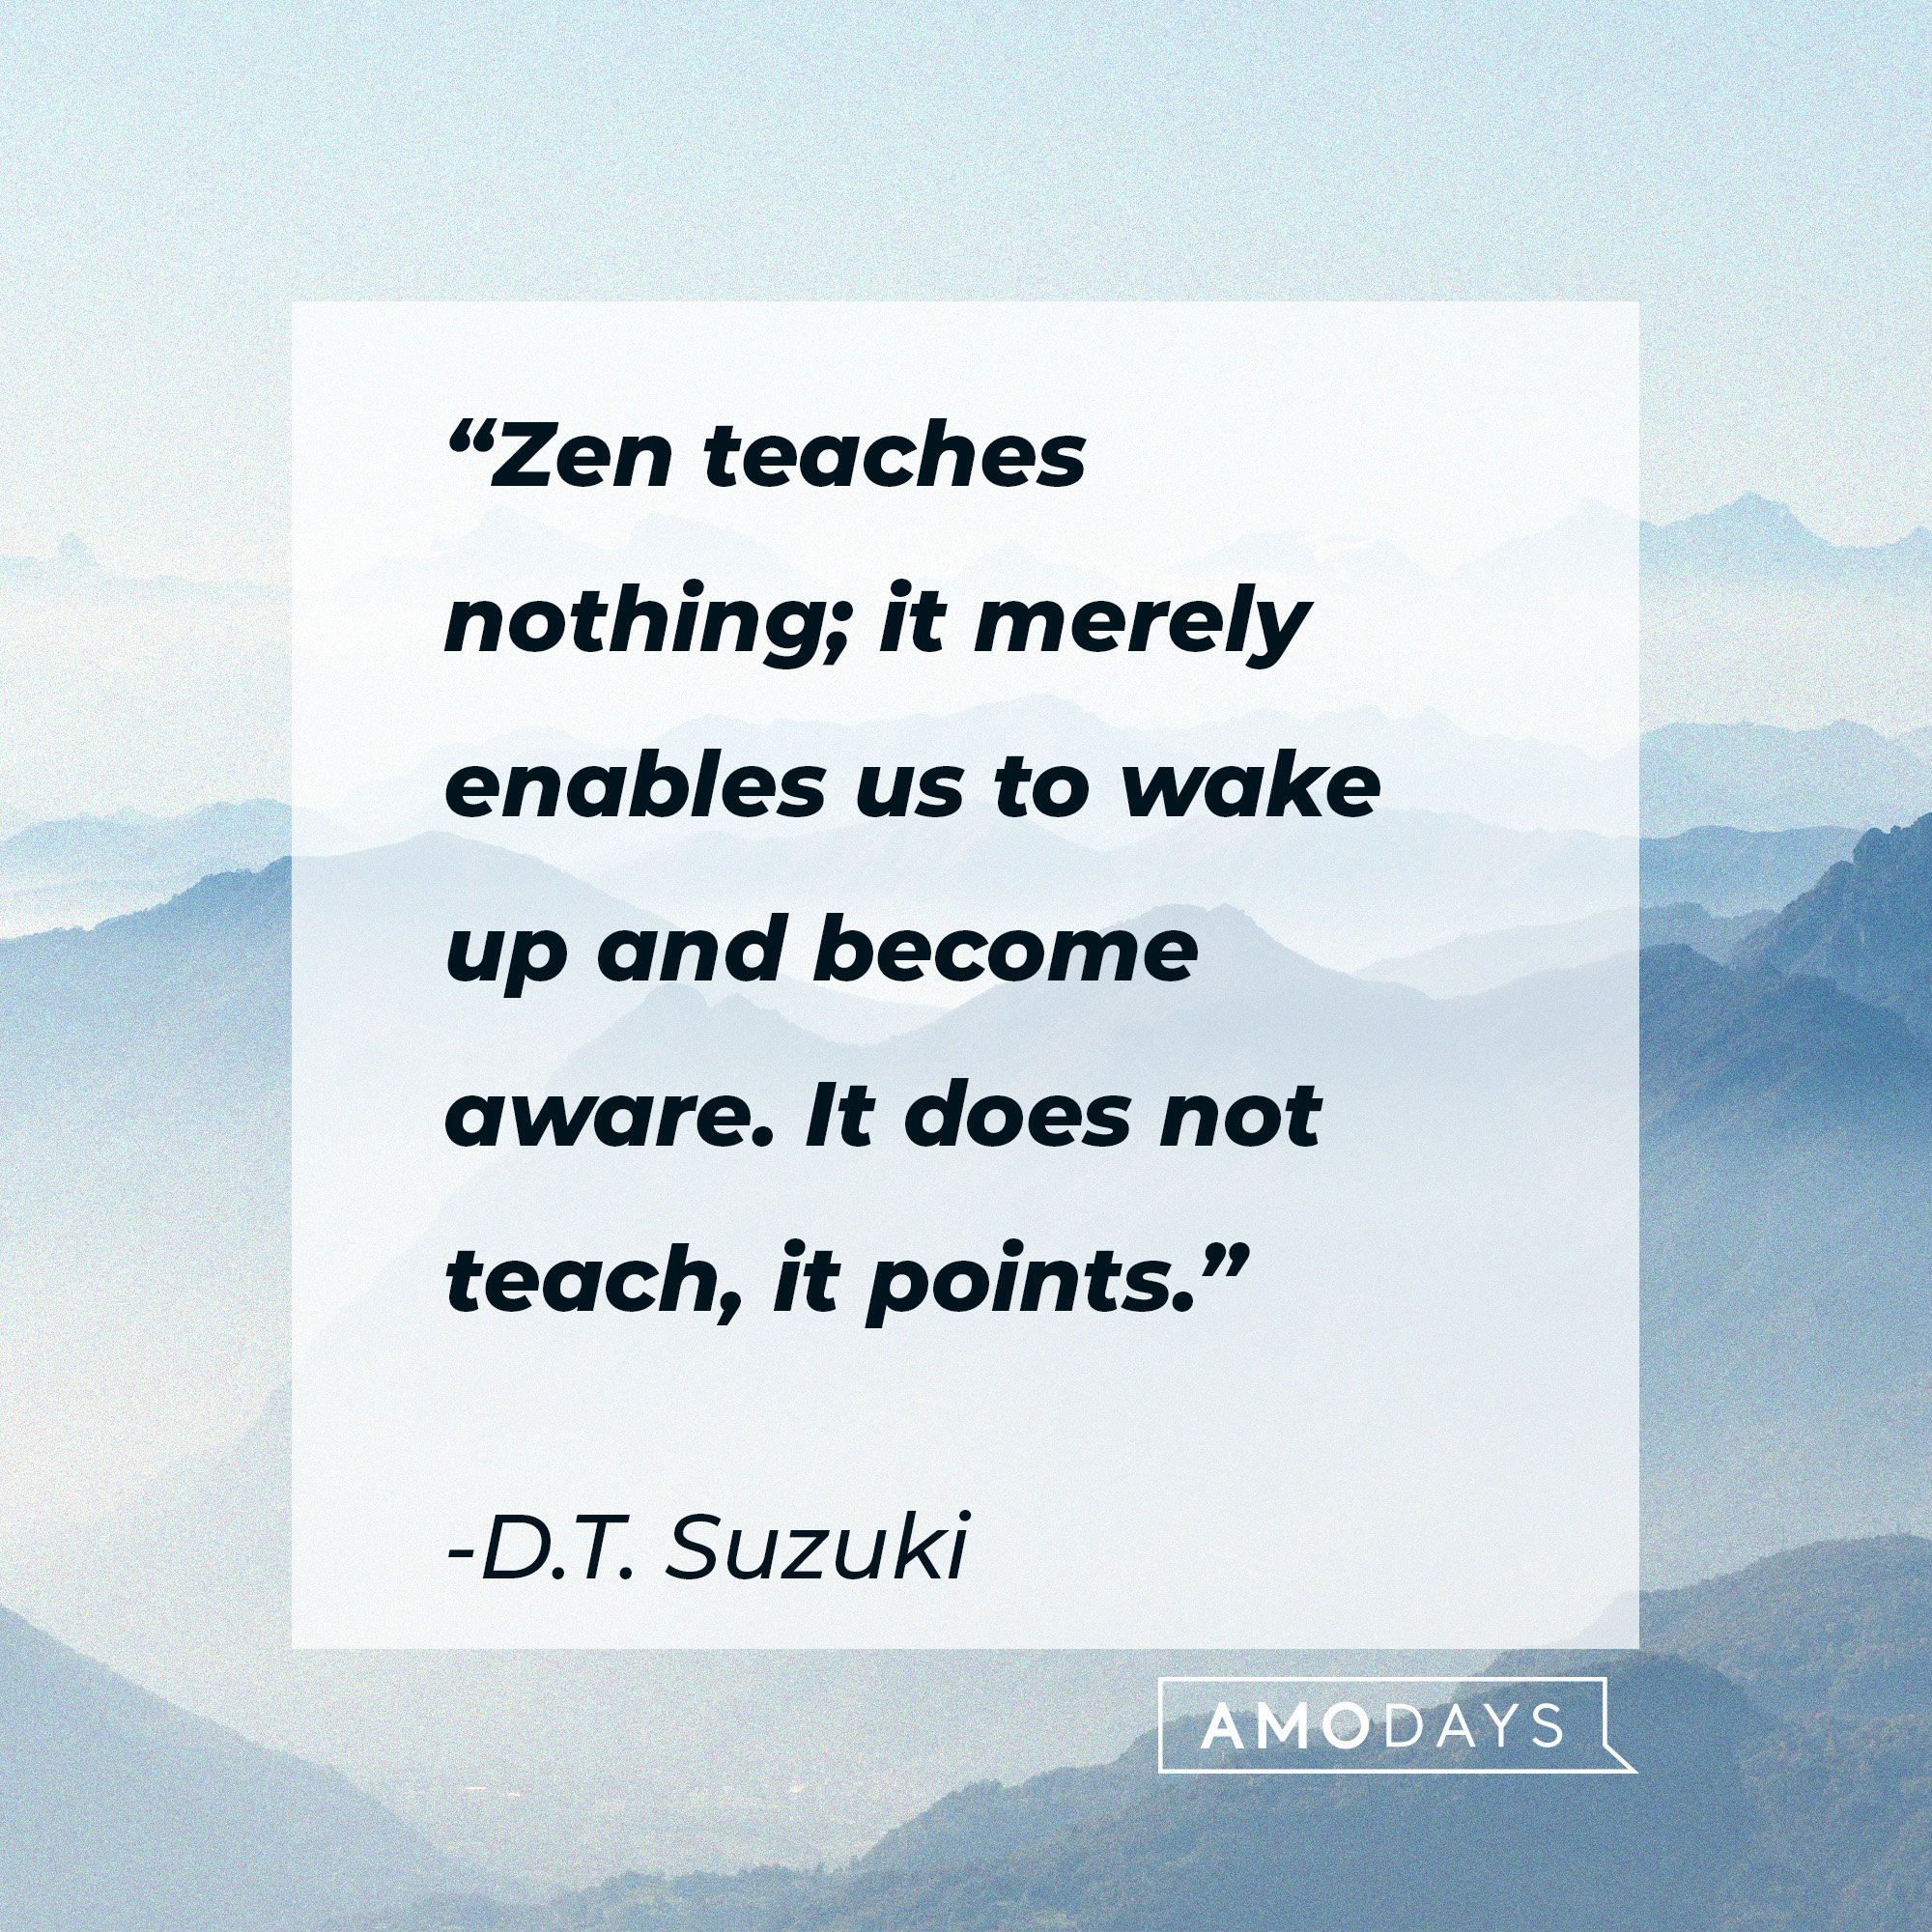  D.T. Suzuki's quote: “Zen teaches nothing; it merely enables us to wake up and become aware. It does not teach, it points.” | Image: AmoDays